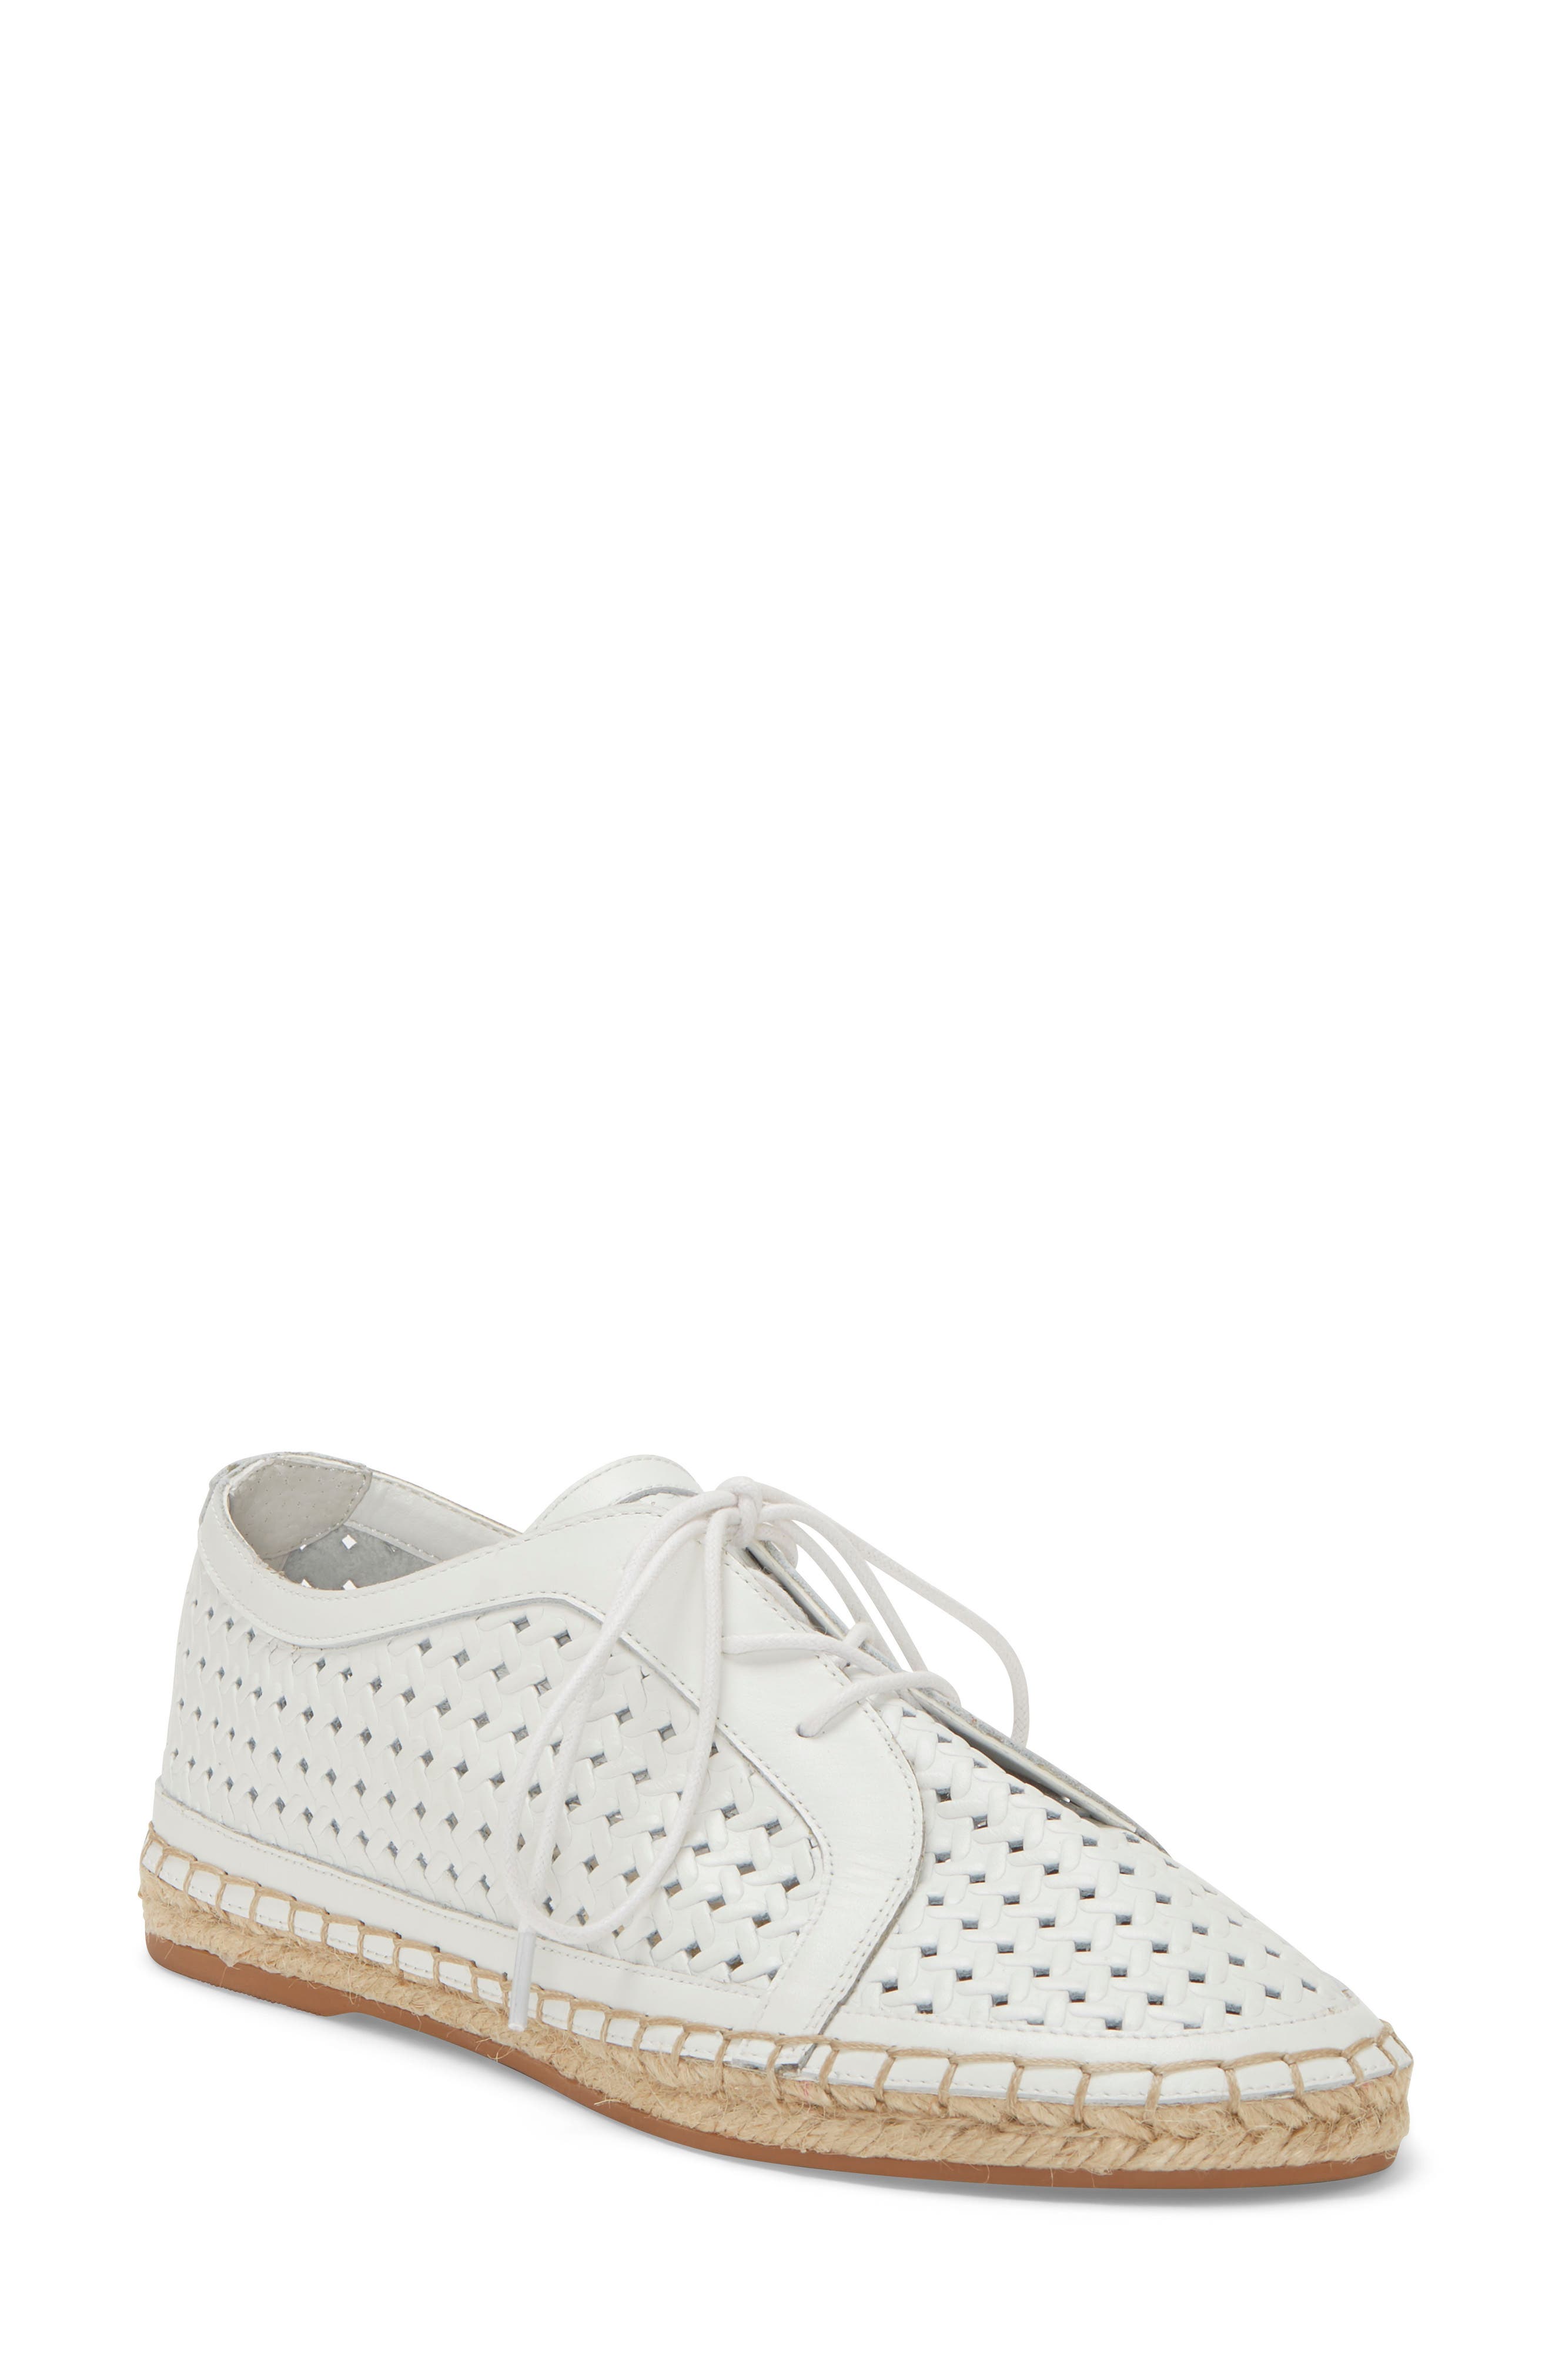 vince camuto white flats